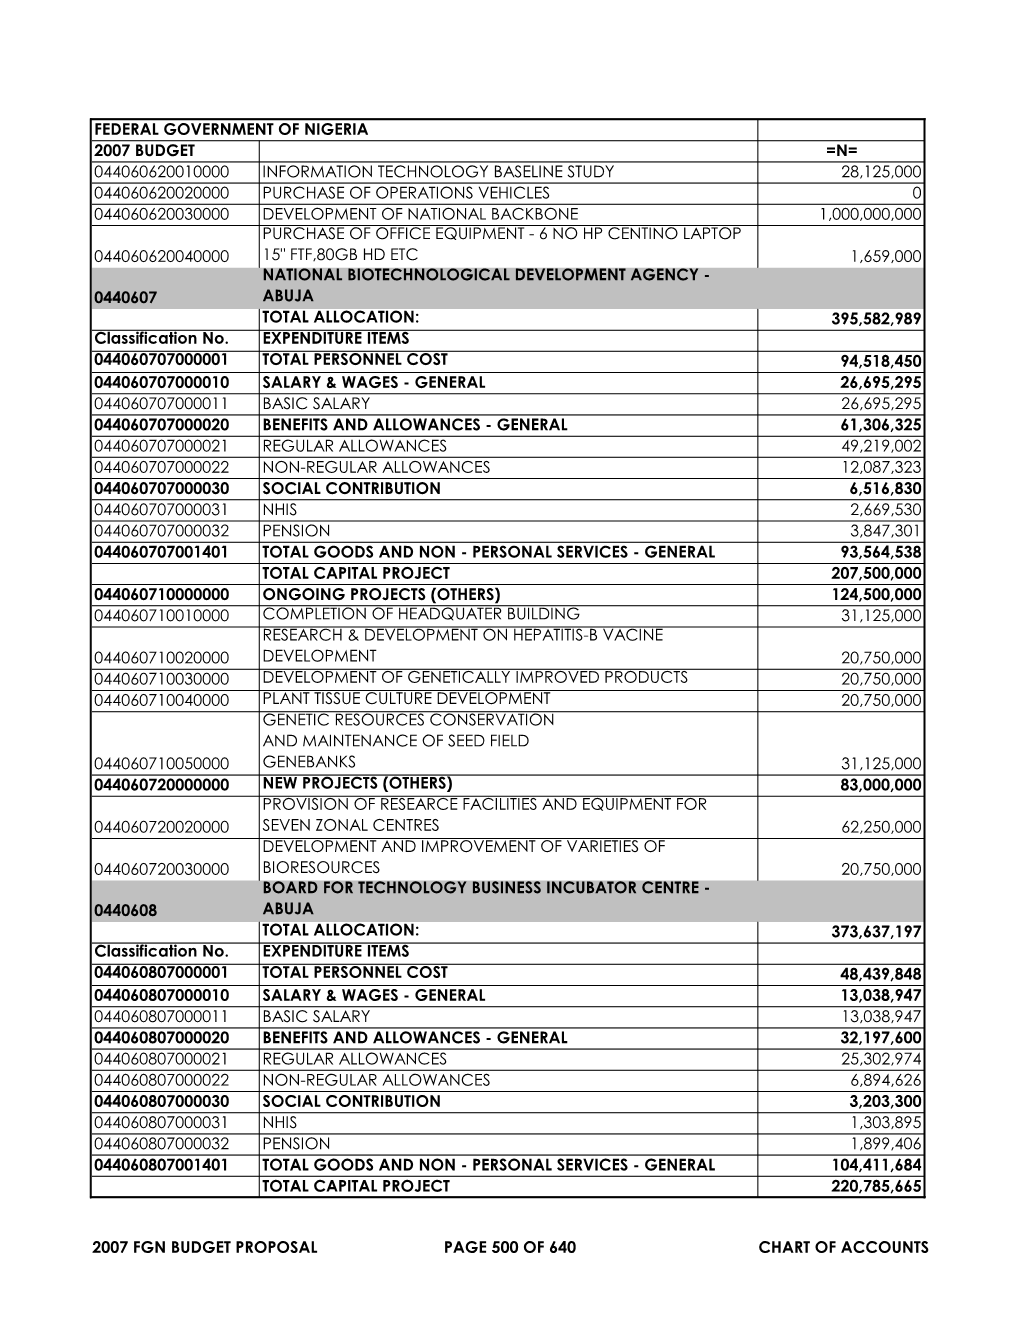 Federal Government of Nigeria 2007 Budget =N